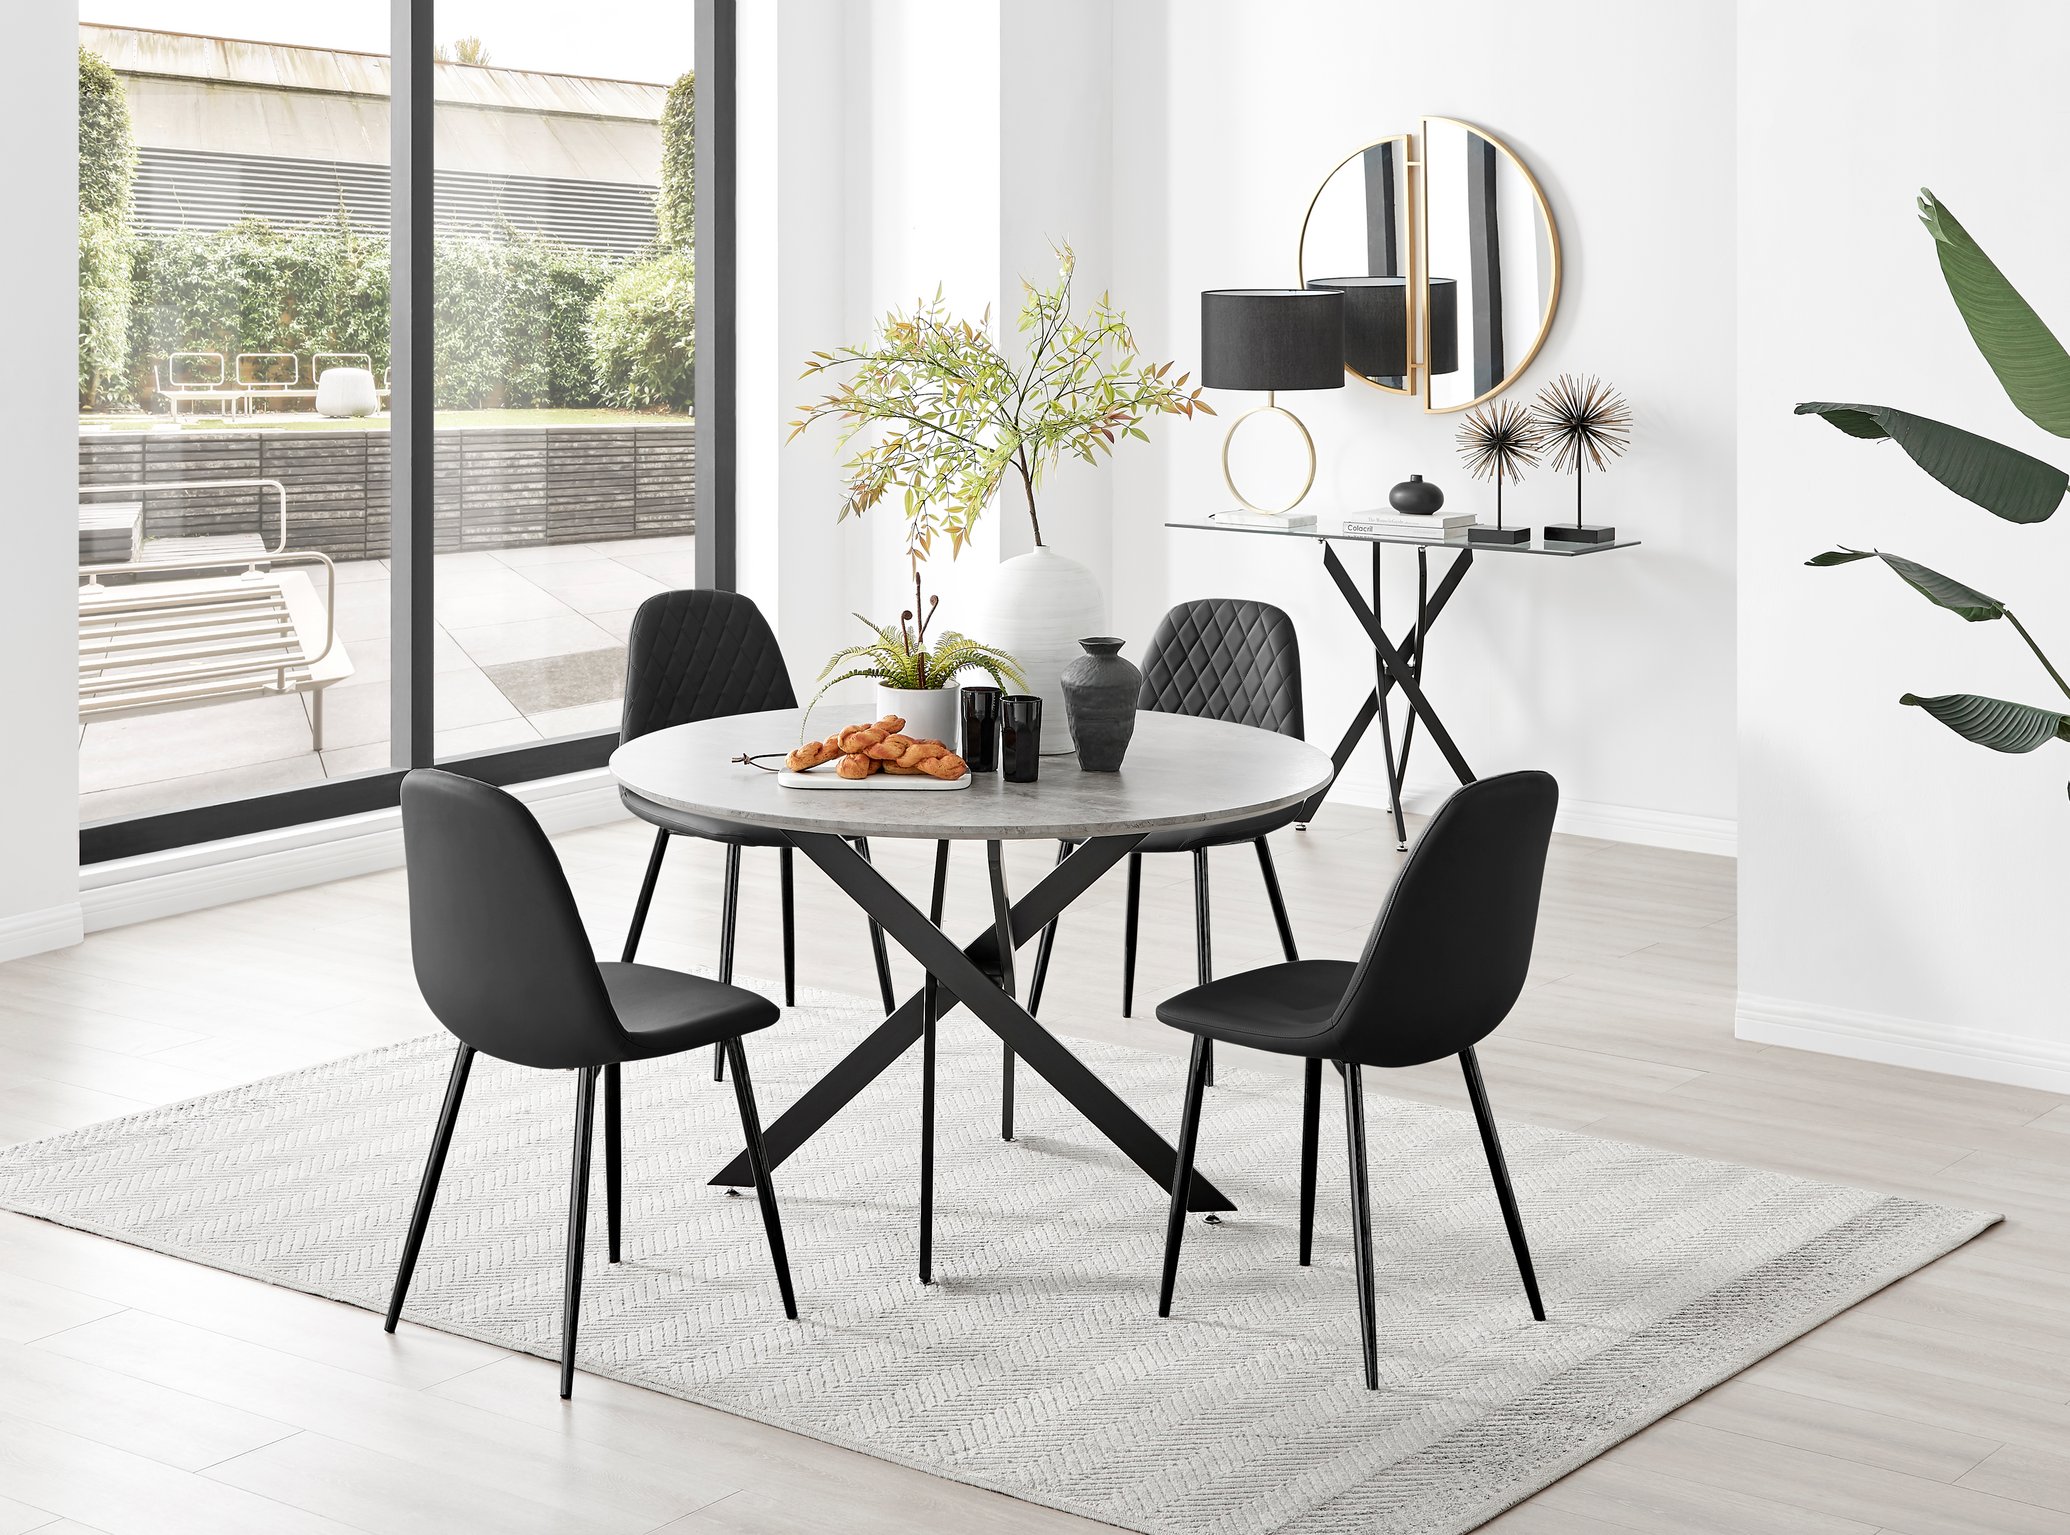 Novara Grey Concrete Effect Round Dining Table 120cm and 4 Corona Chairs Set